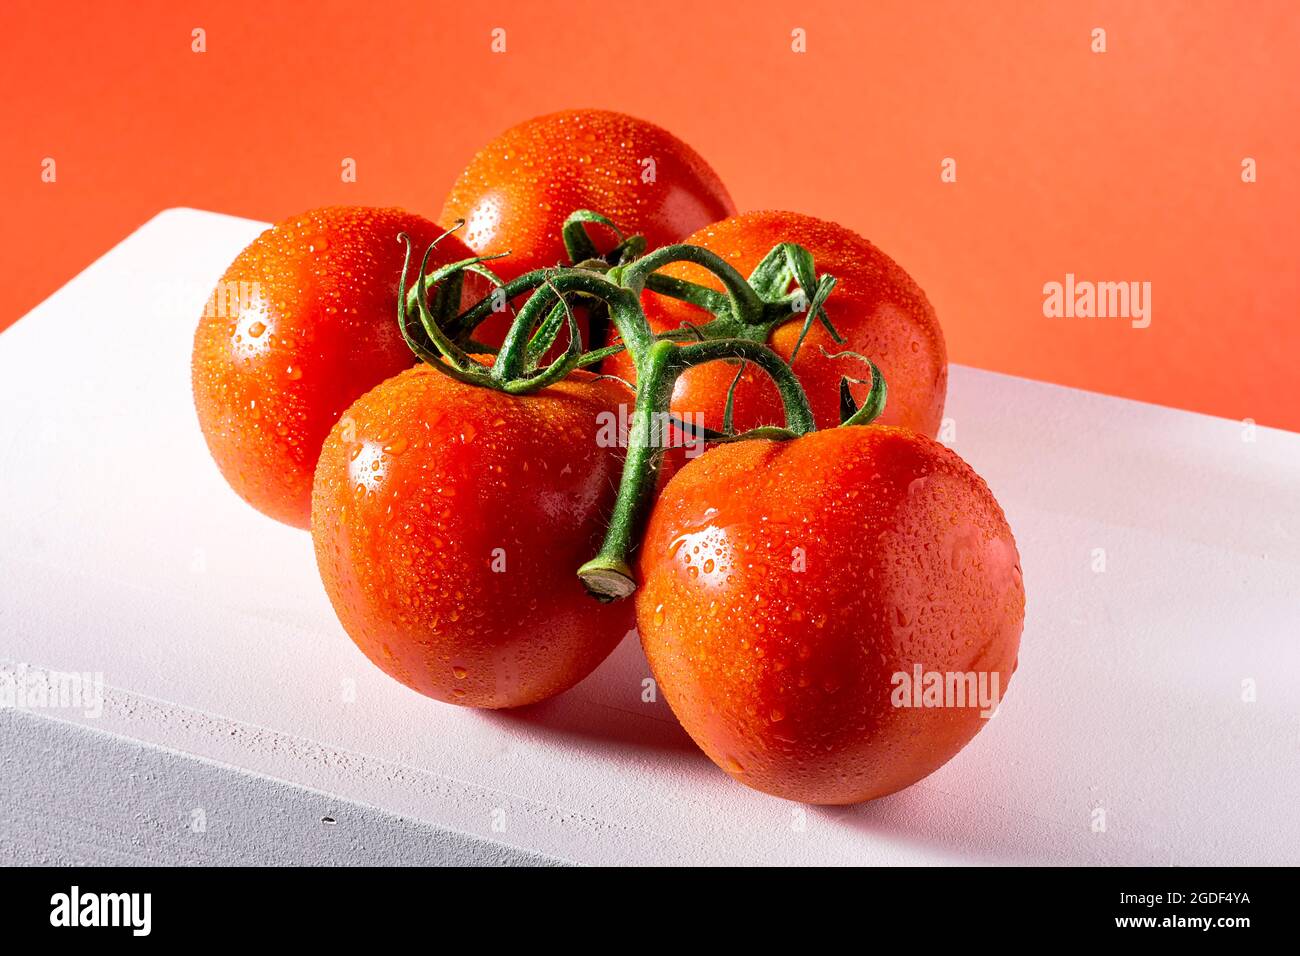 Photograph of a branch of five wet natural tomatoes on a white table and a red background.The photo is taken in horizontal format. Stock Photo